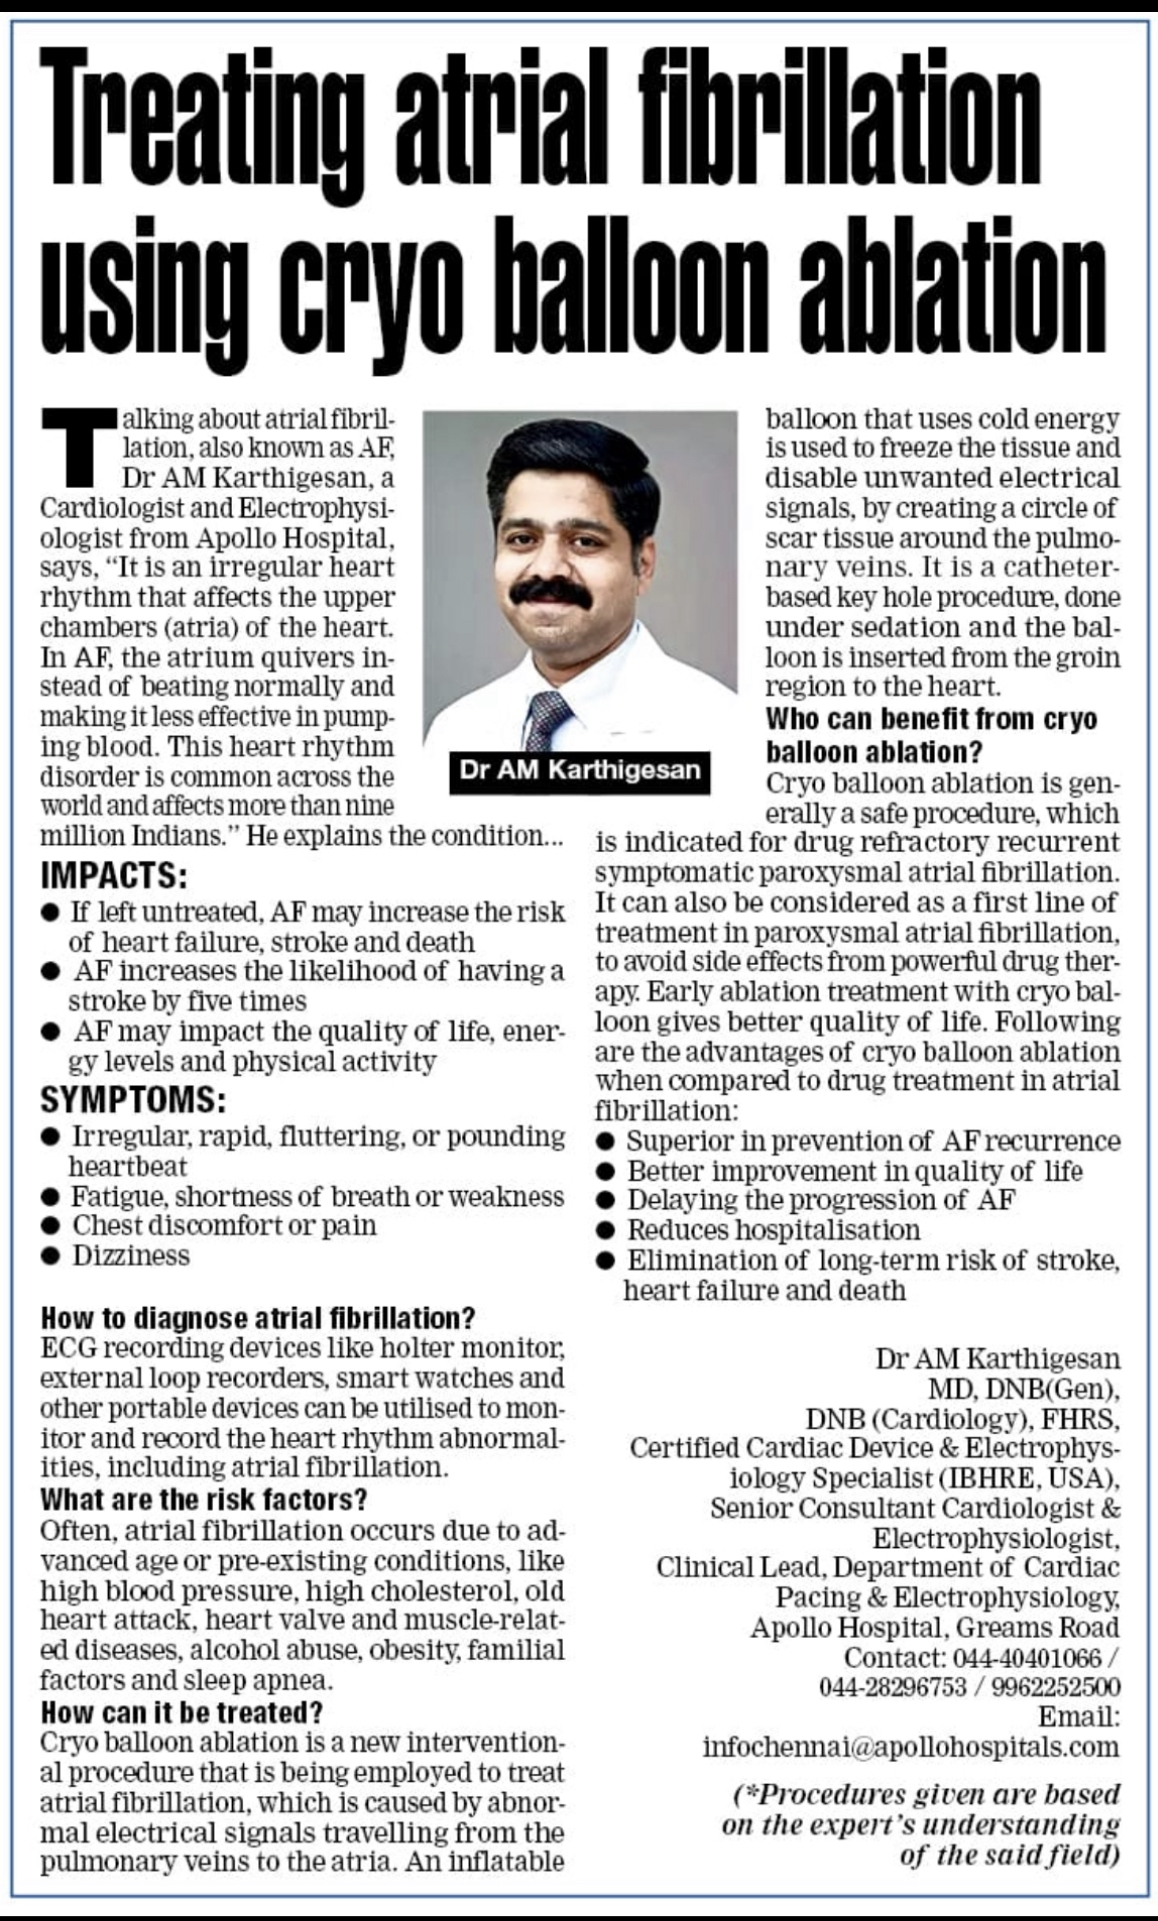 Image of news clipping about 'Treating Atrial fibrillation using Cryo Ballon Ablation' by Dr. Karthigesan.